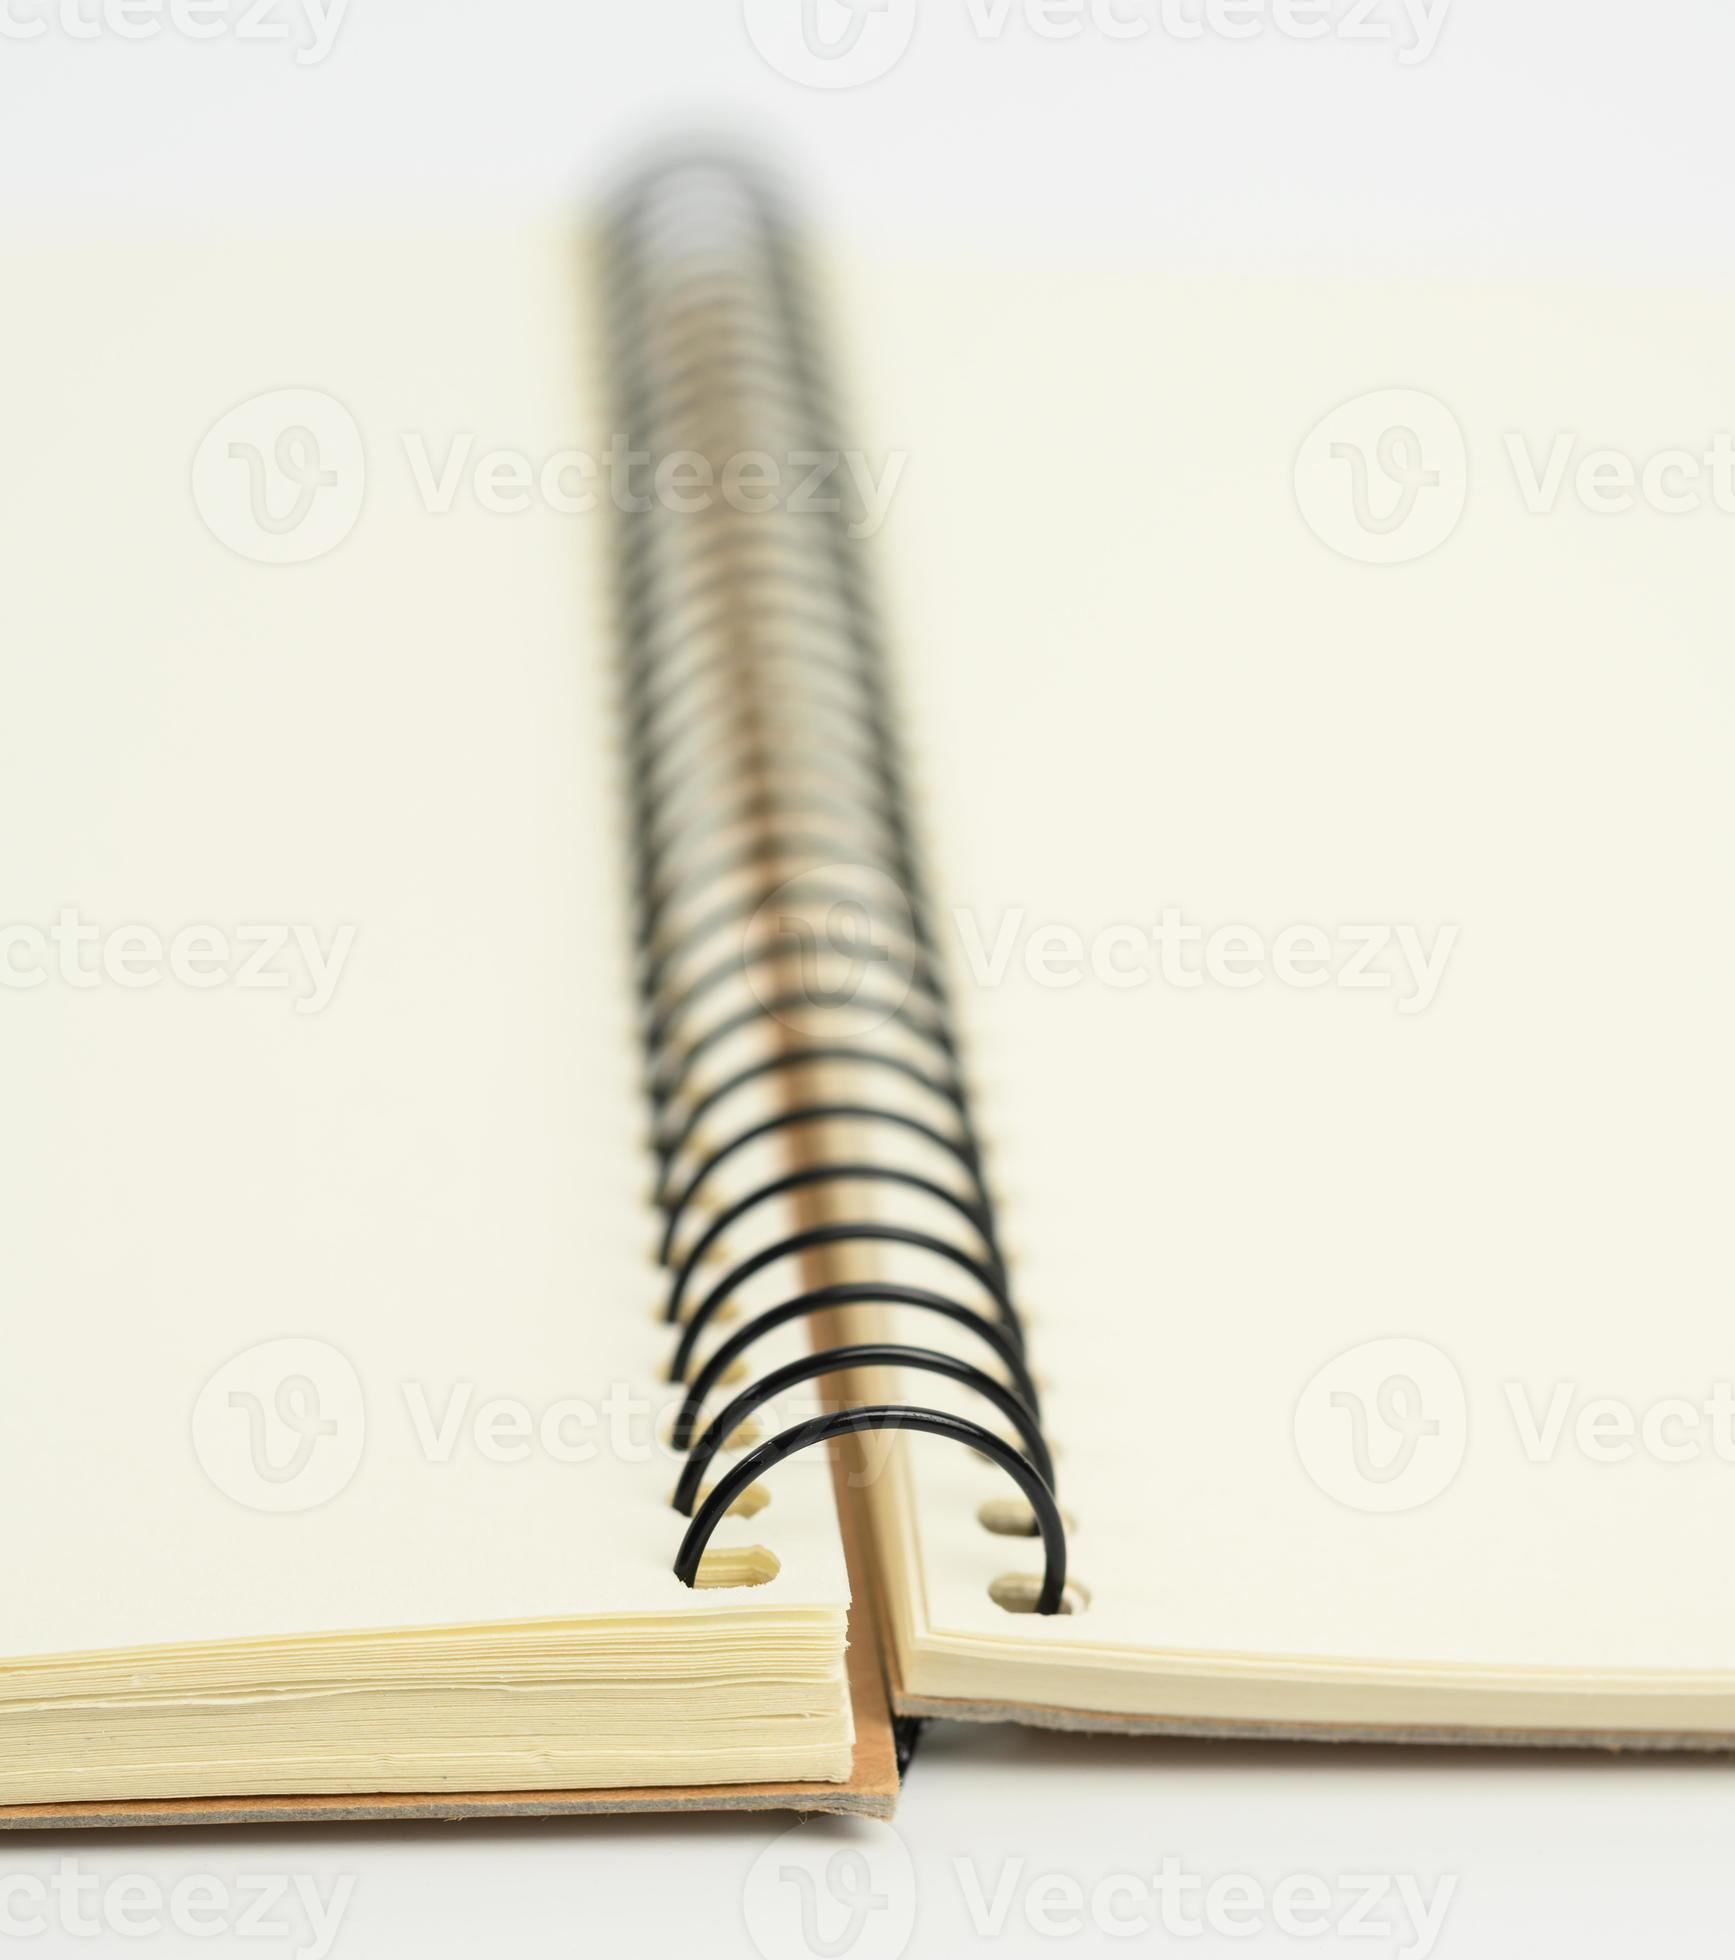 Blank white spiral notebook containing book, notebook, and white